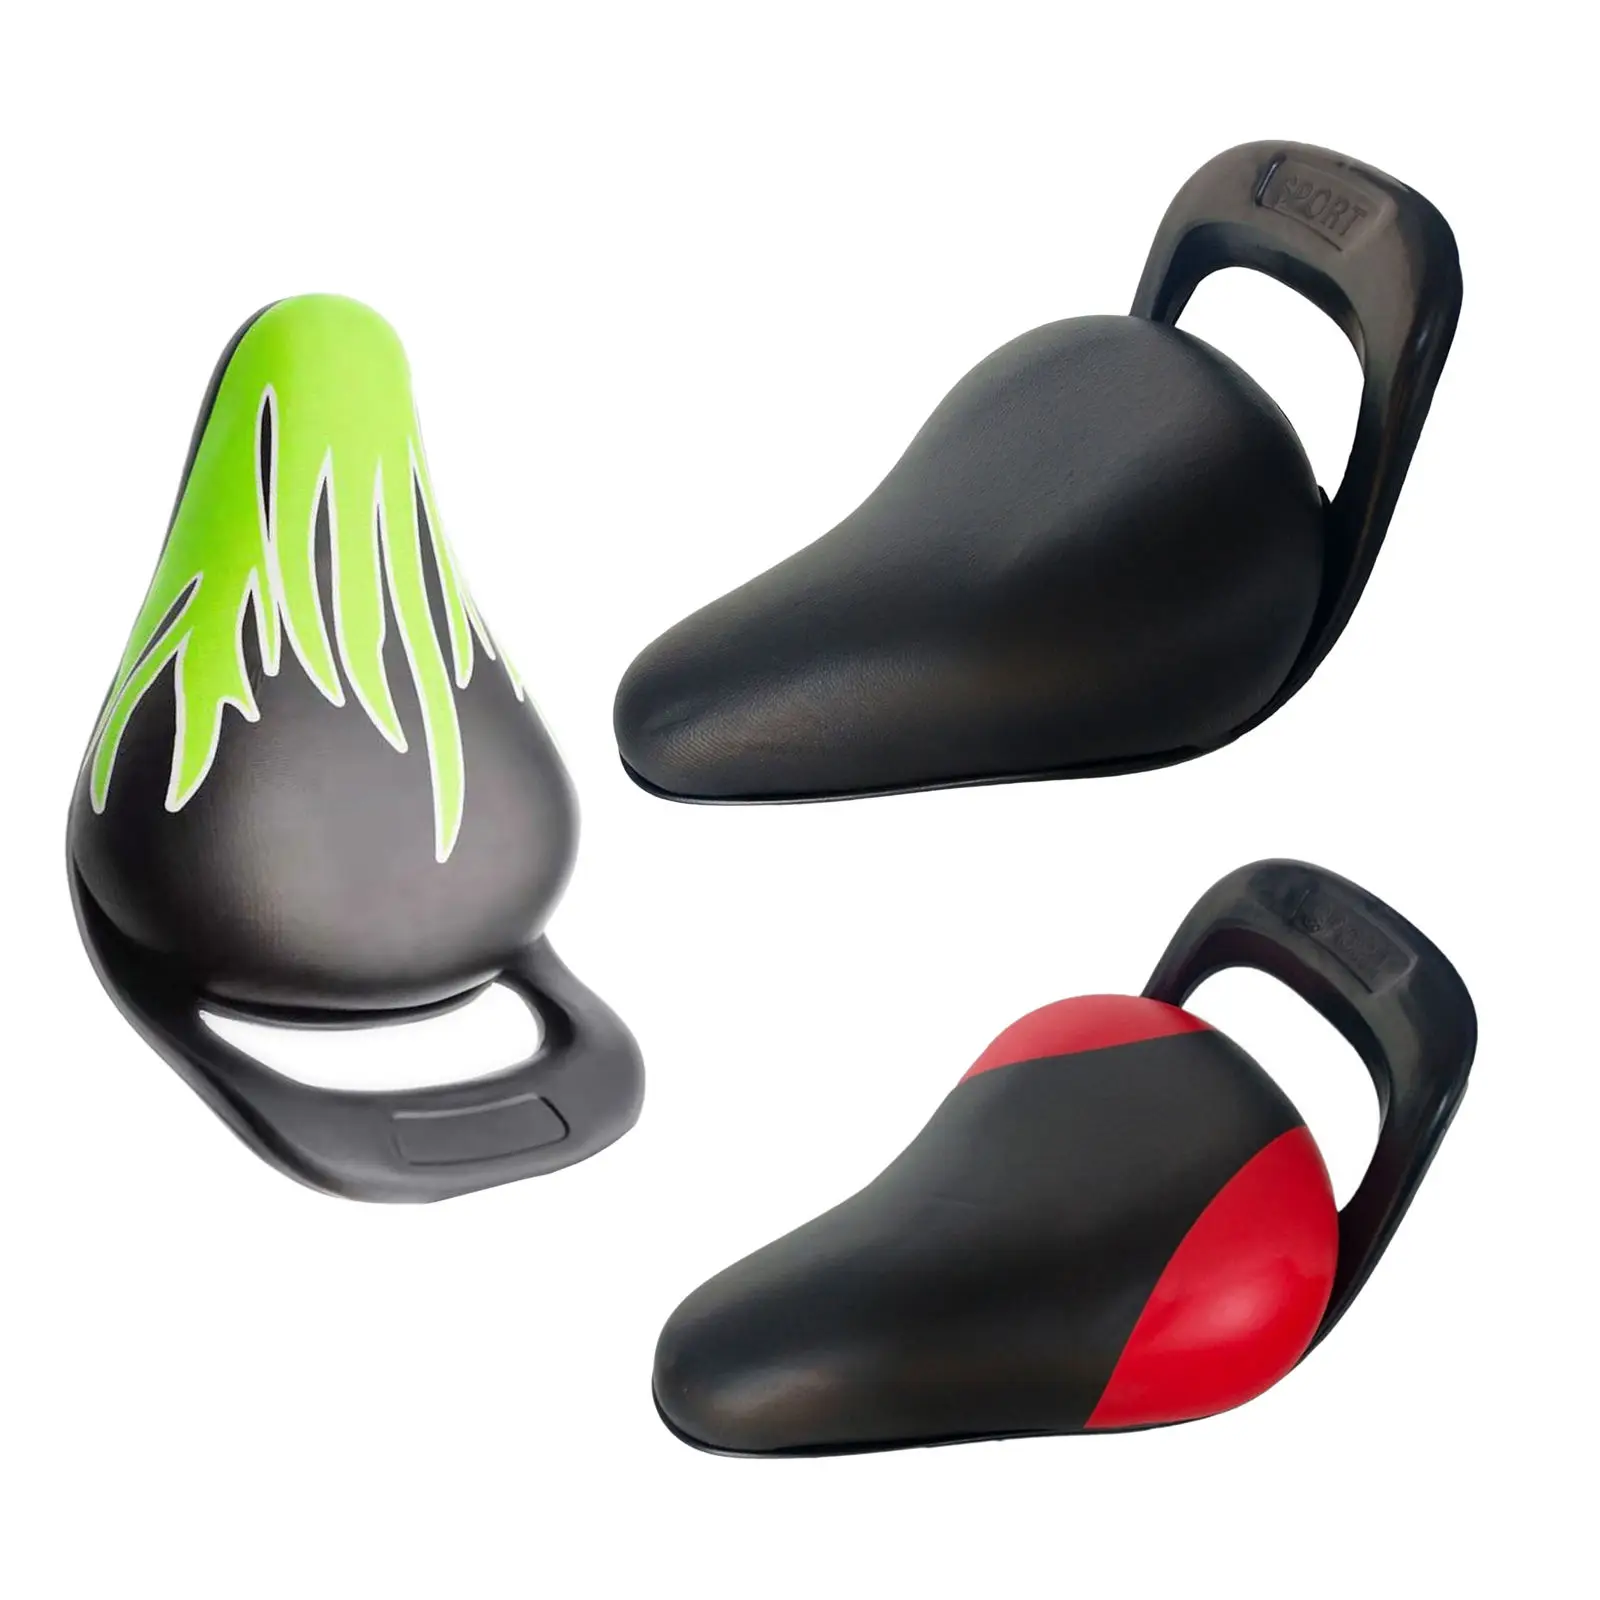 Safety Kids Bike Saddle Comfortable Soft Cushion Cycling Accessories Children Seat Bike Seat for Kids for Most Kid Bicycles MTB